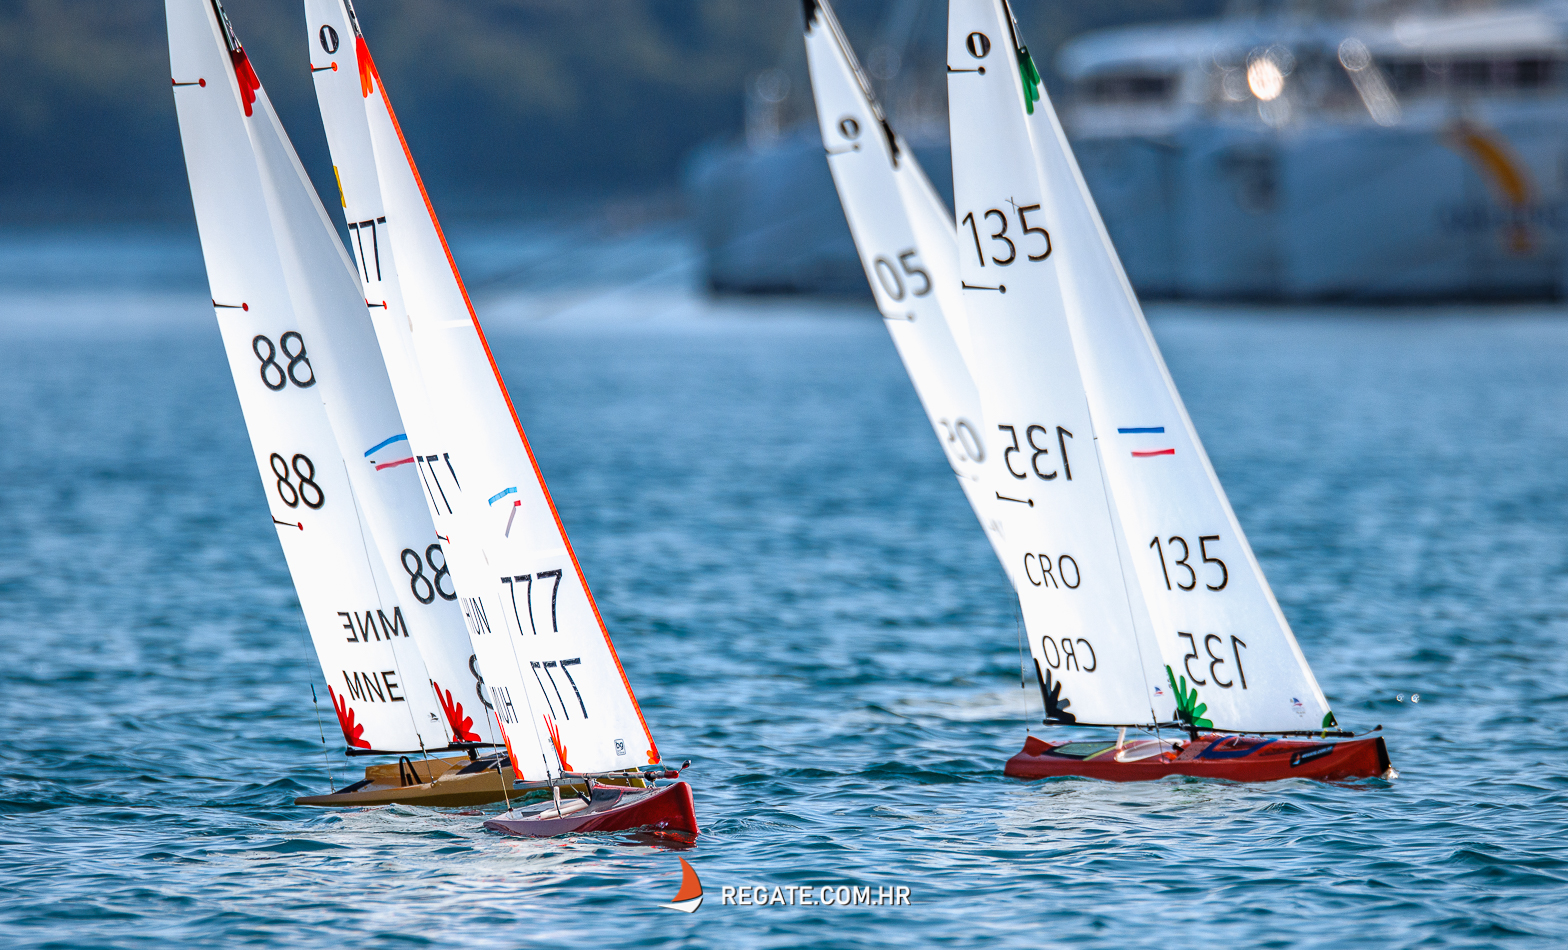 IMG_2914 - IOM CRO Nationals - day 2